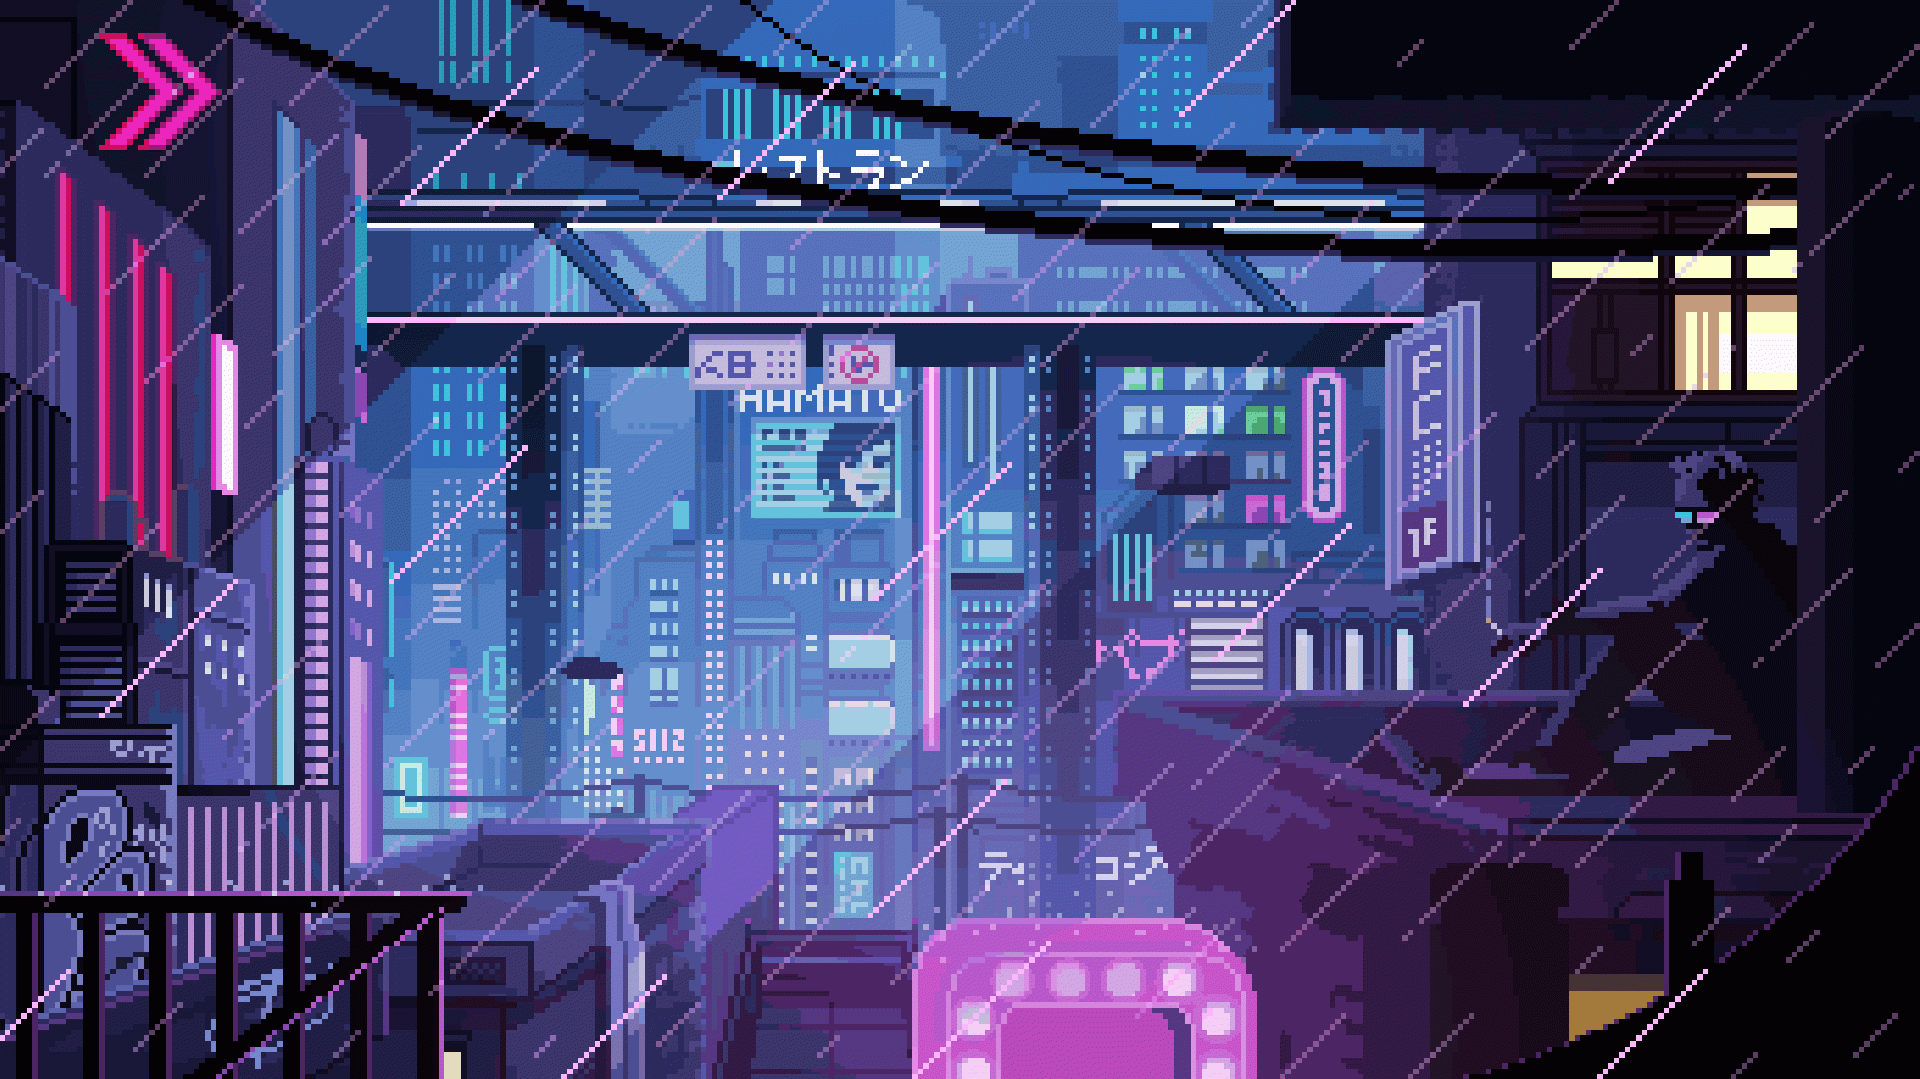 Bit Neon City For Desktop Or Mobile Device Make Your